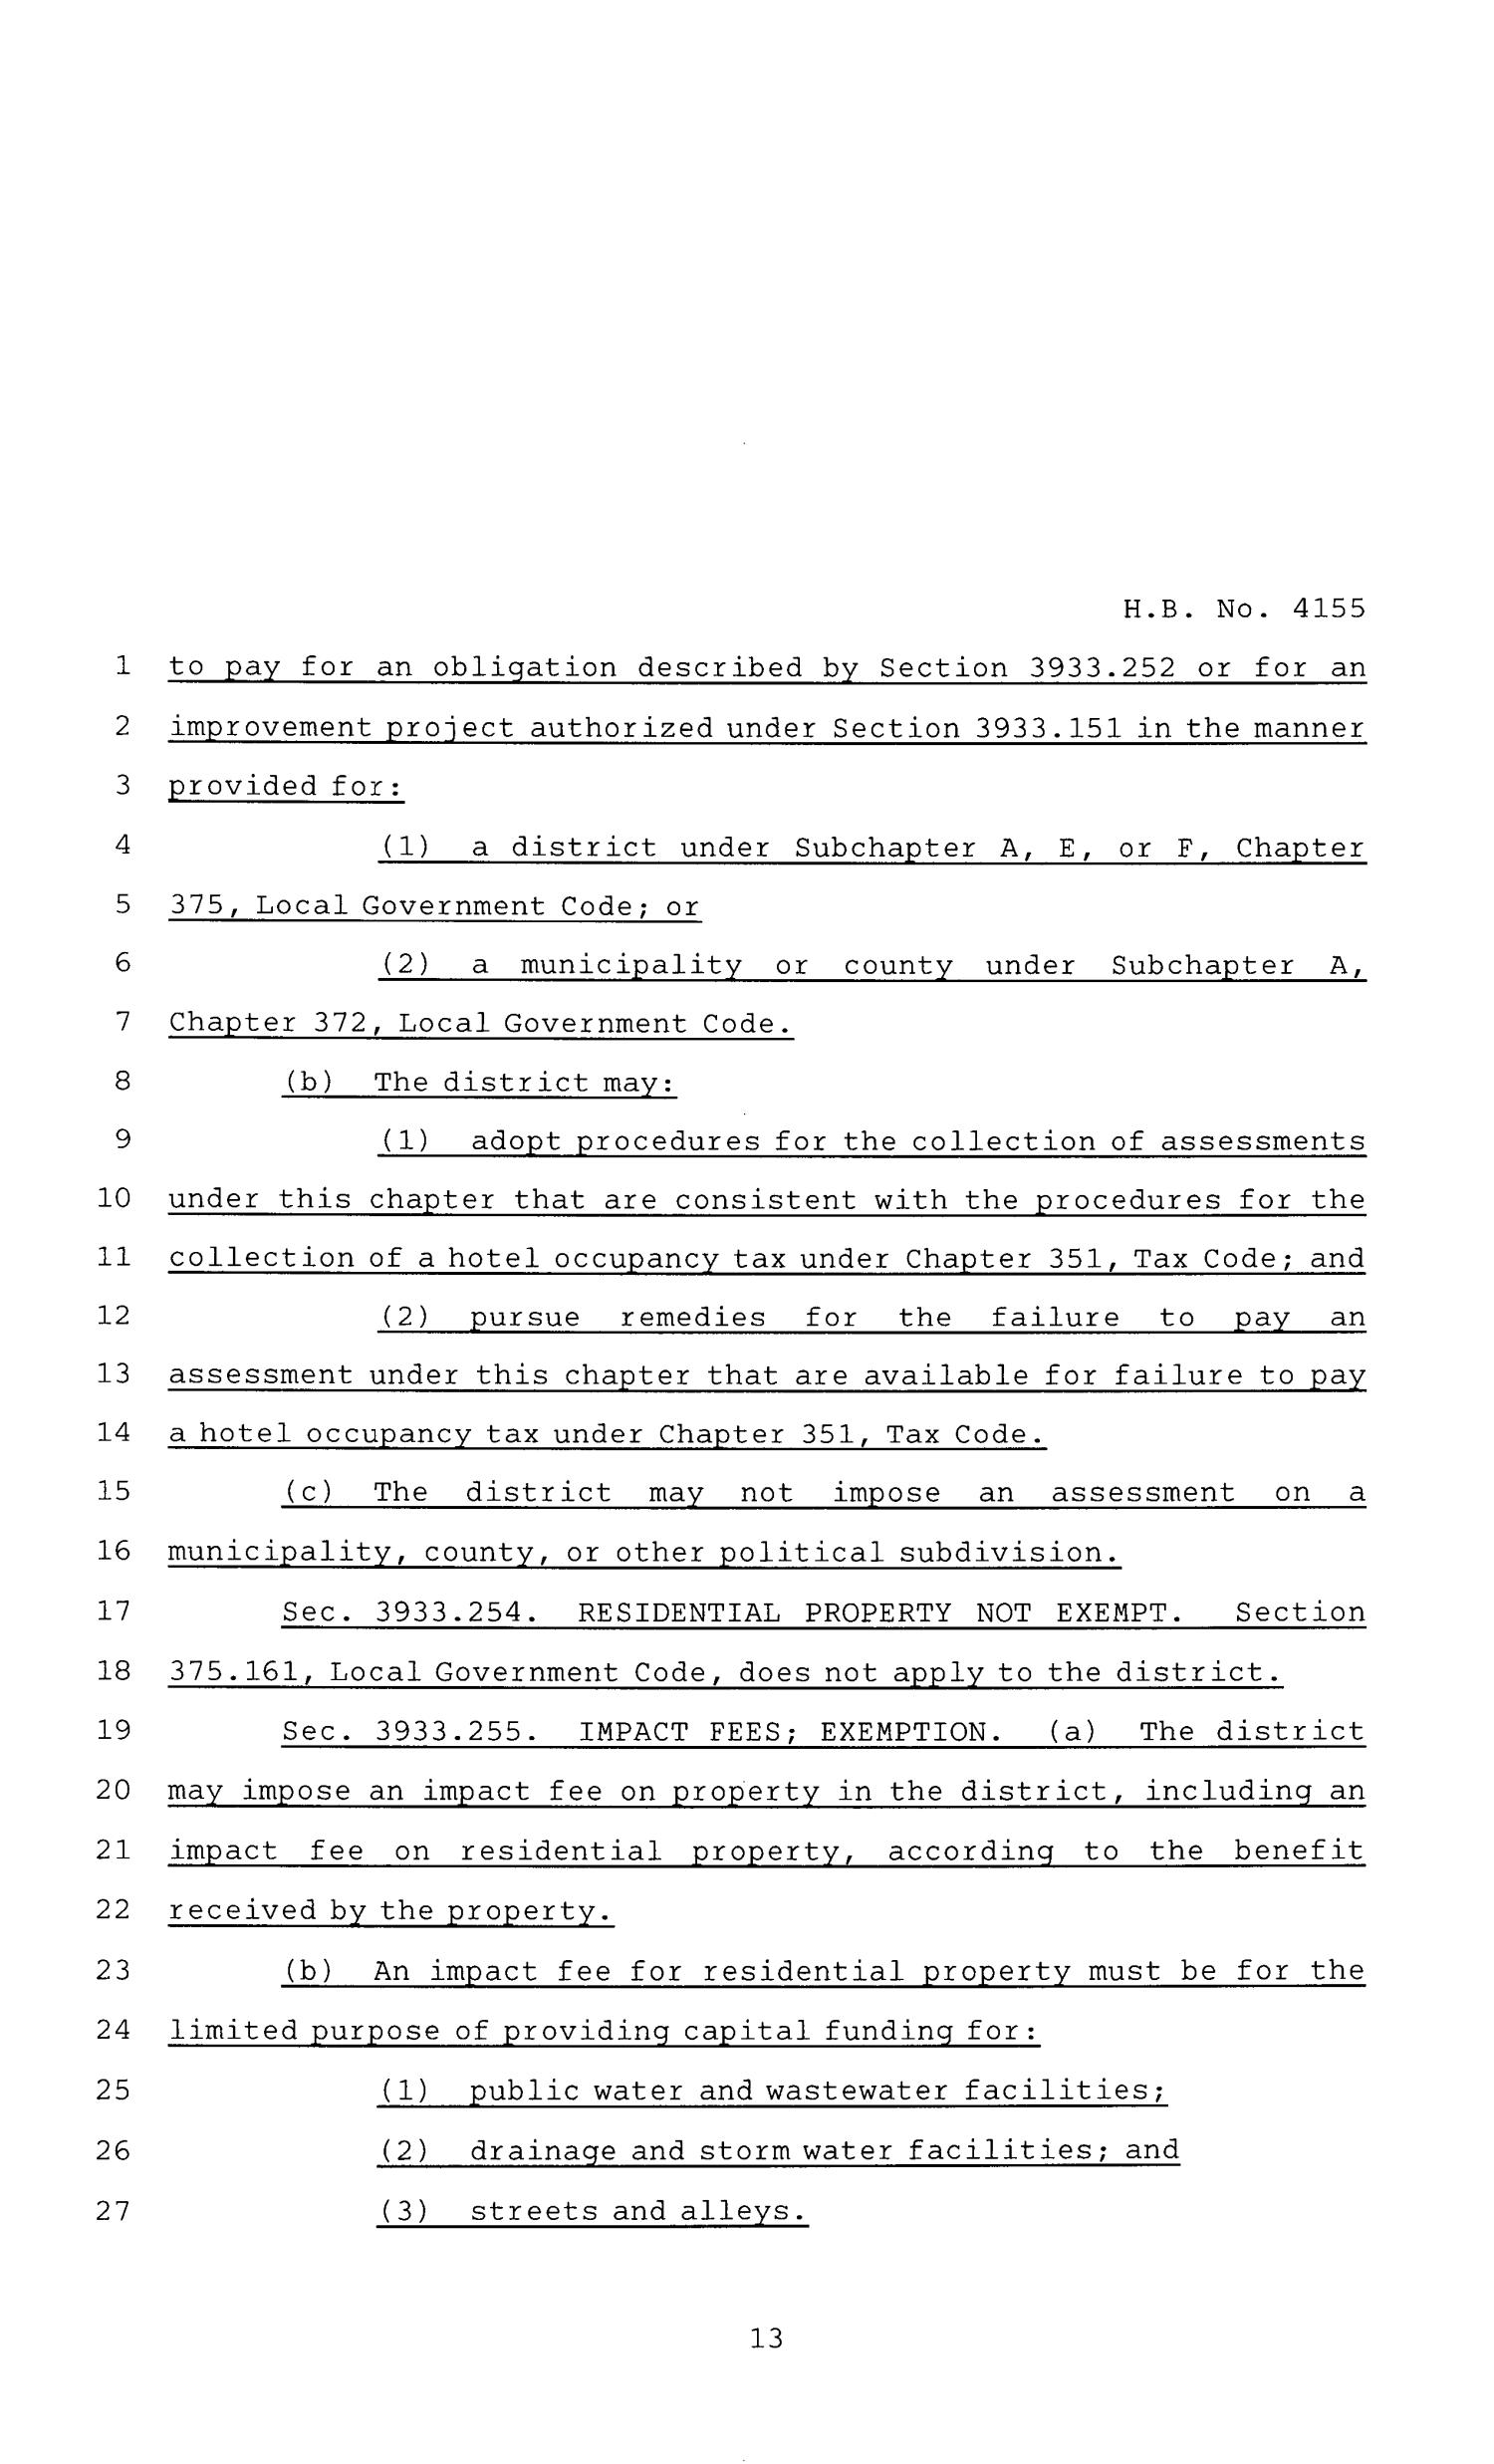 84th Texas Legislature, Regular Session, House Bill 4155, Chapter 1239
                                                
                                                    [Sequence #]: 13 of 53
                                                